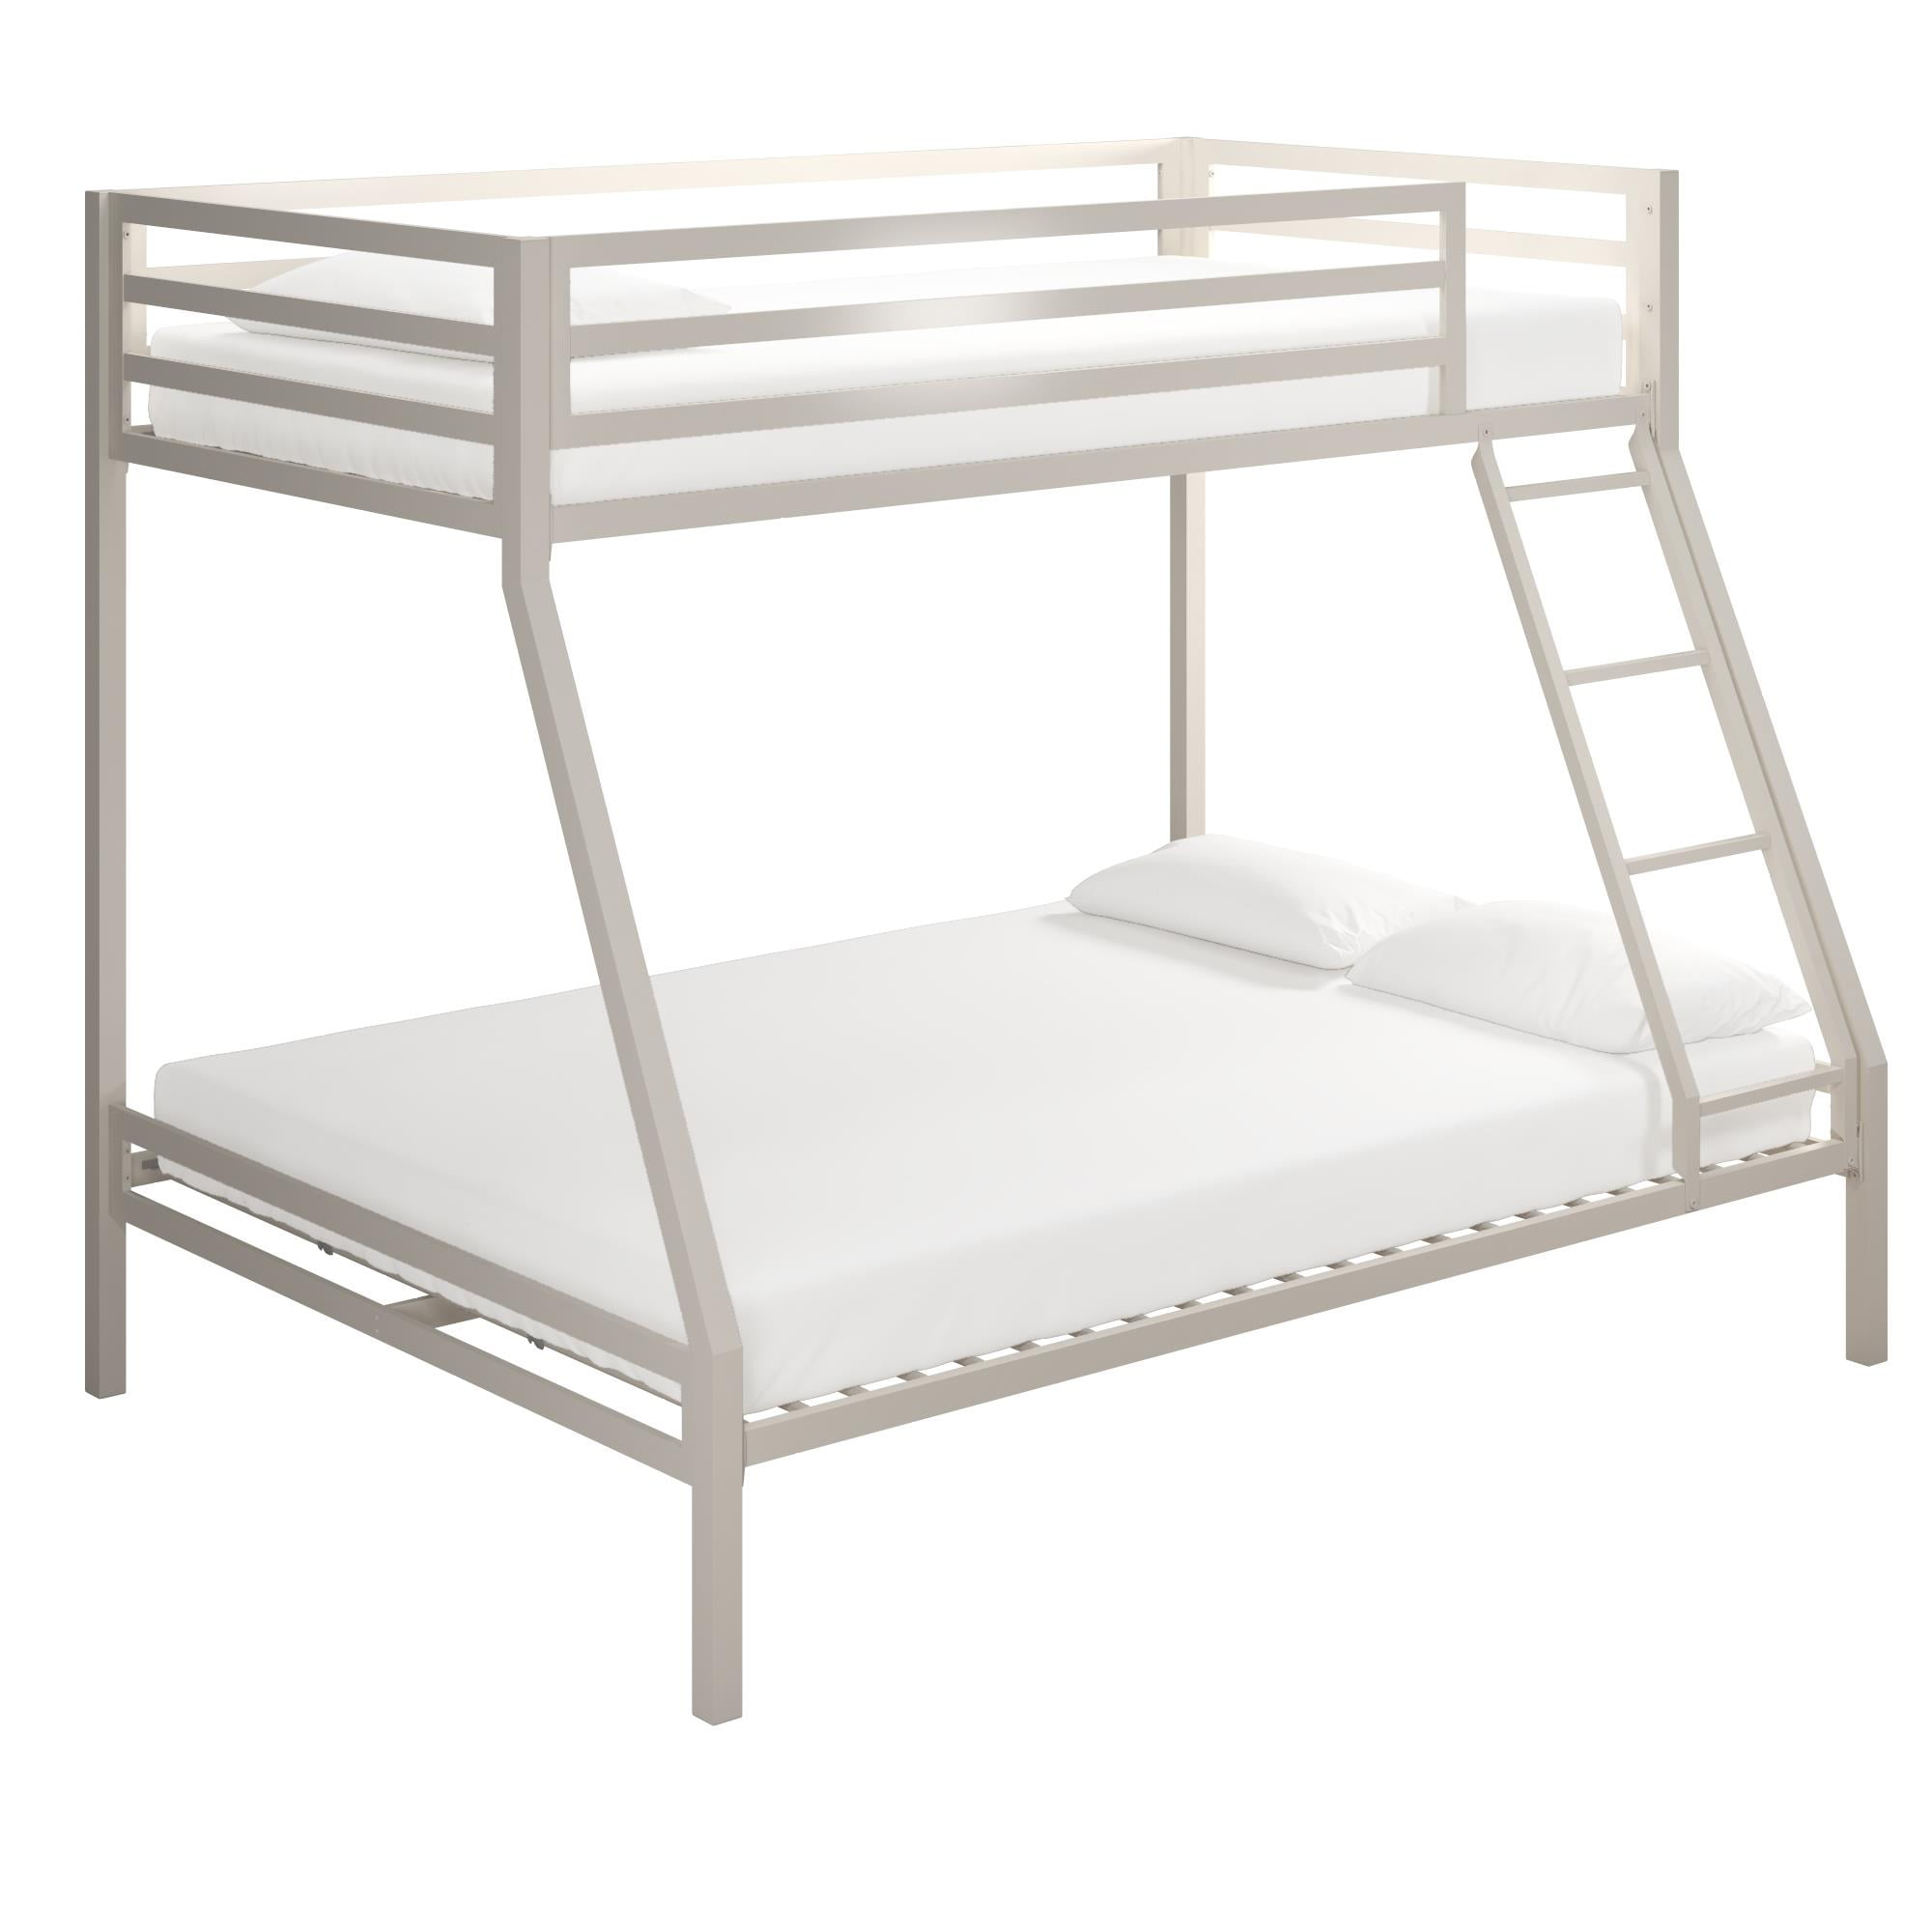 Mainstays Premium Twin Over Full Bunk Bed, Mainstays Bunk Bed Twin Over Full Length